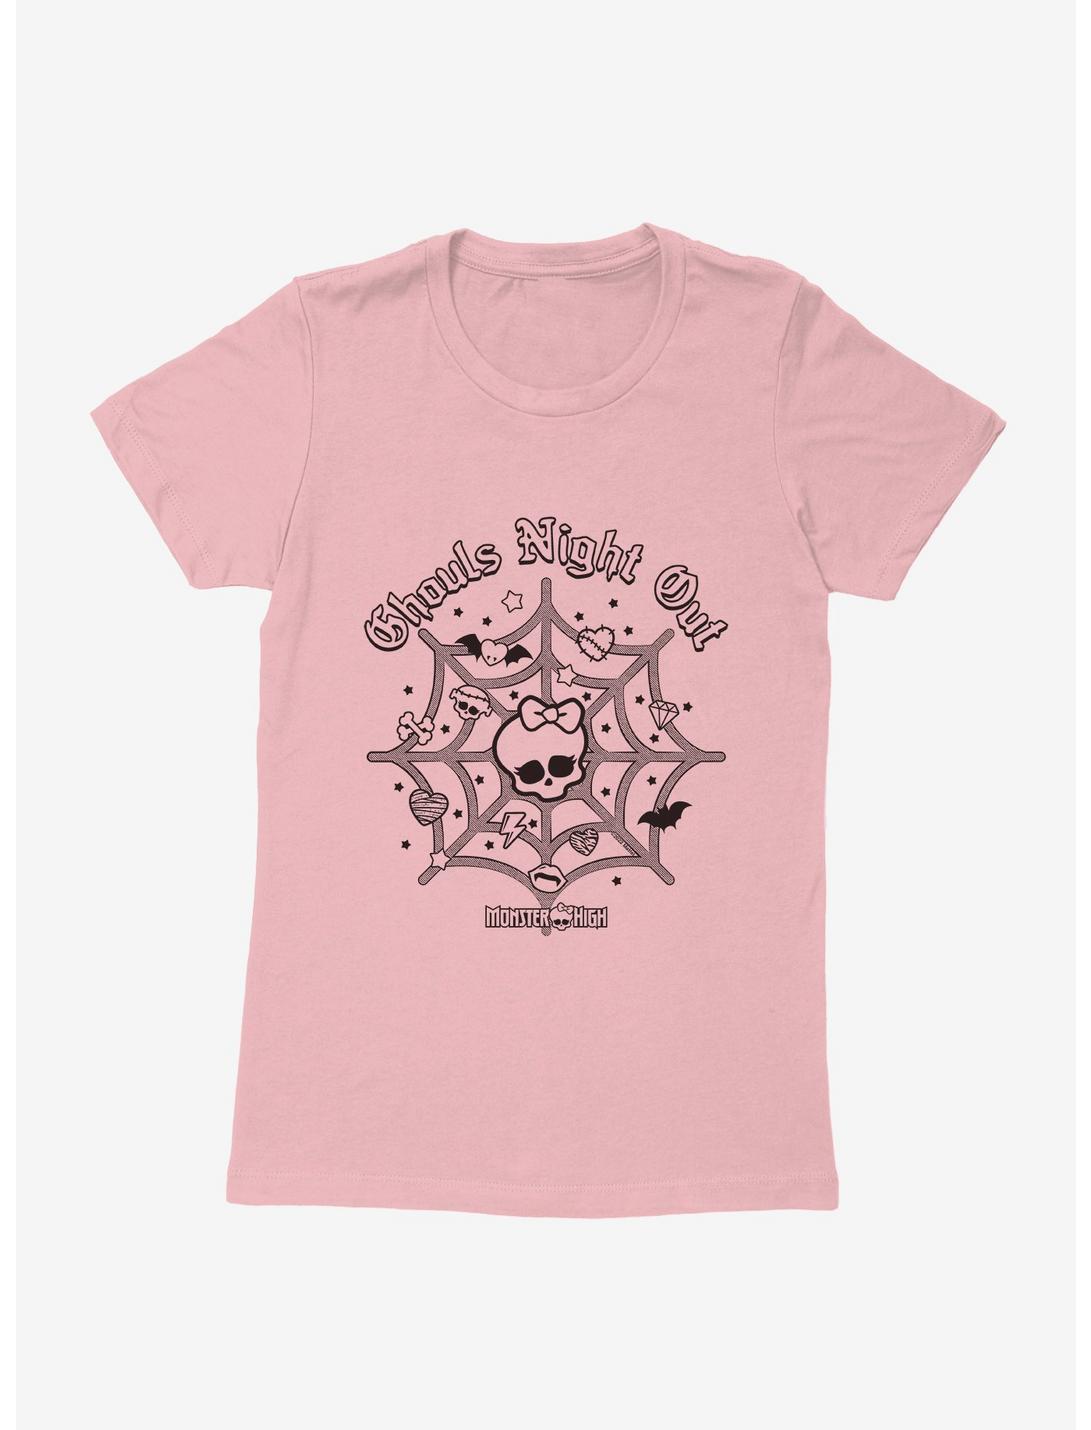 Monster High Ghouls Night Out Spiderweb Womens T-Shirt, LIGHT PINK, hi-res